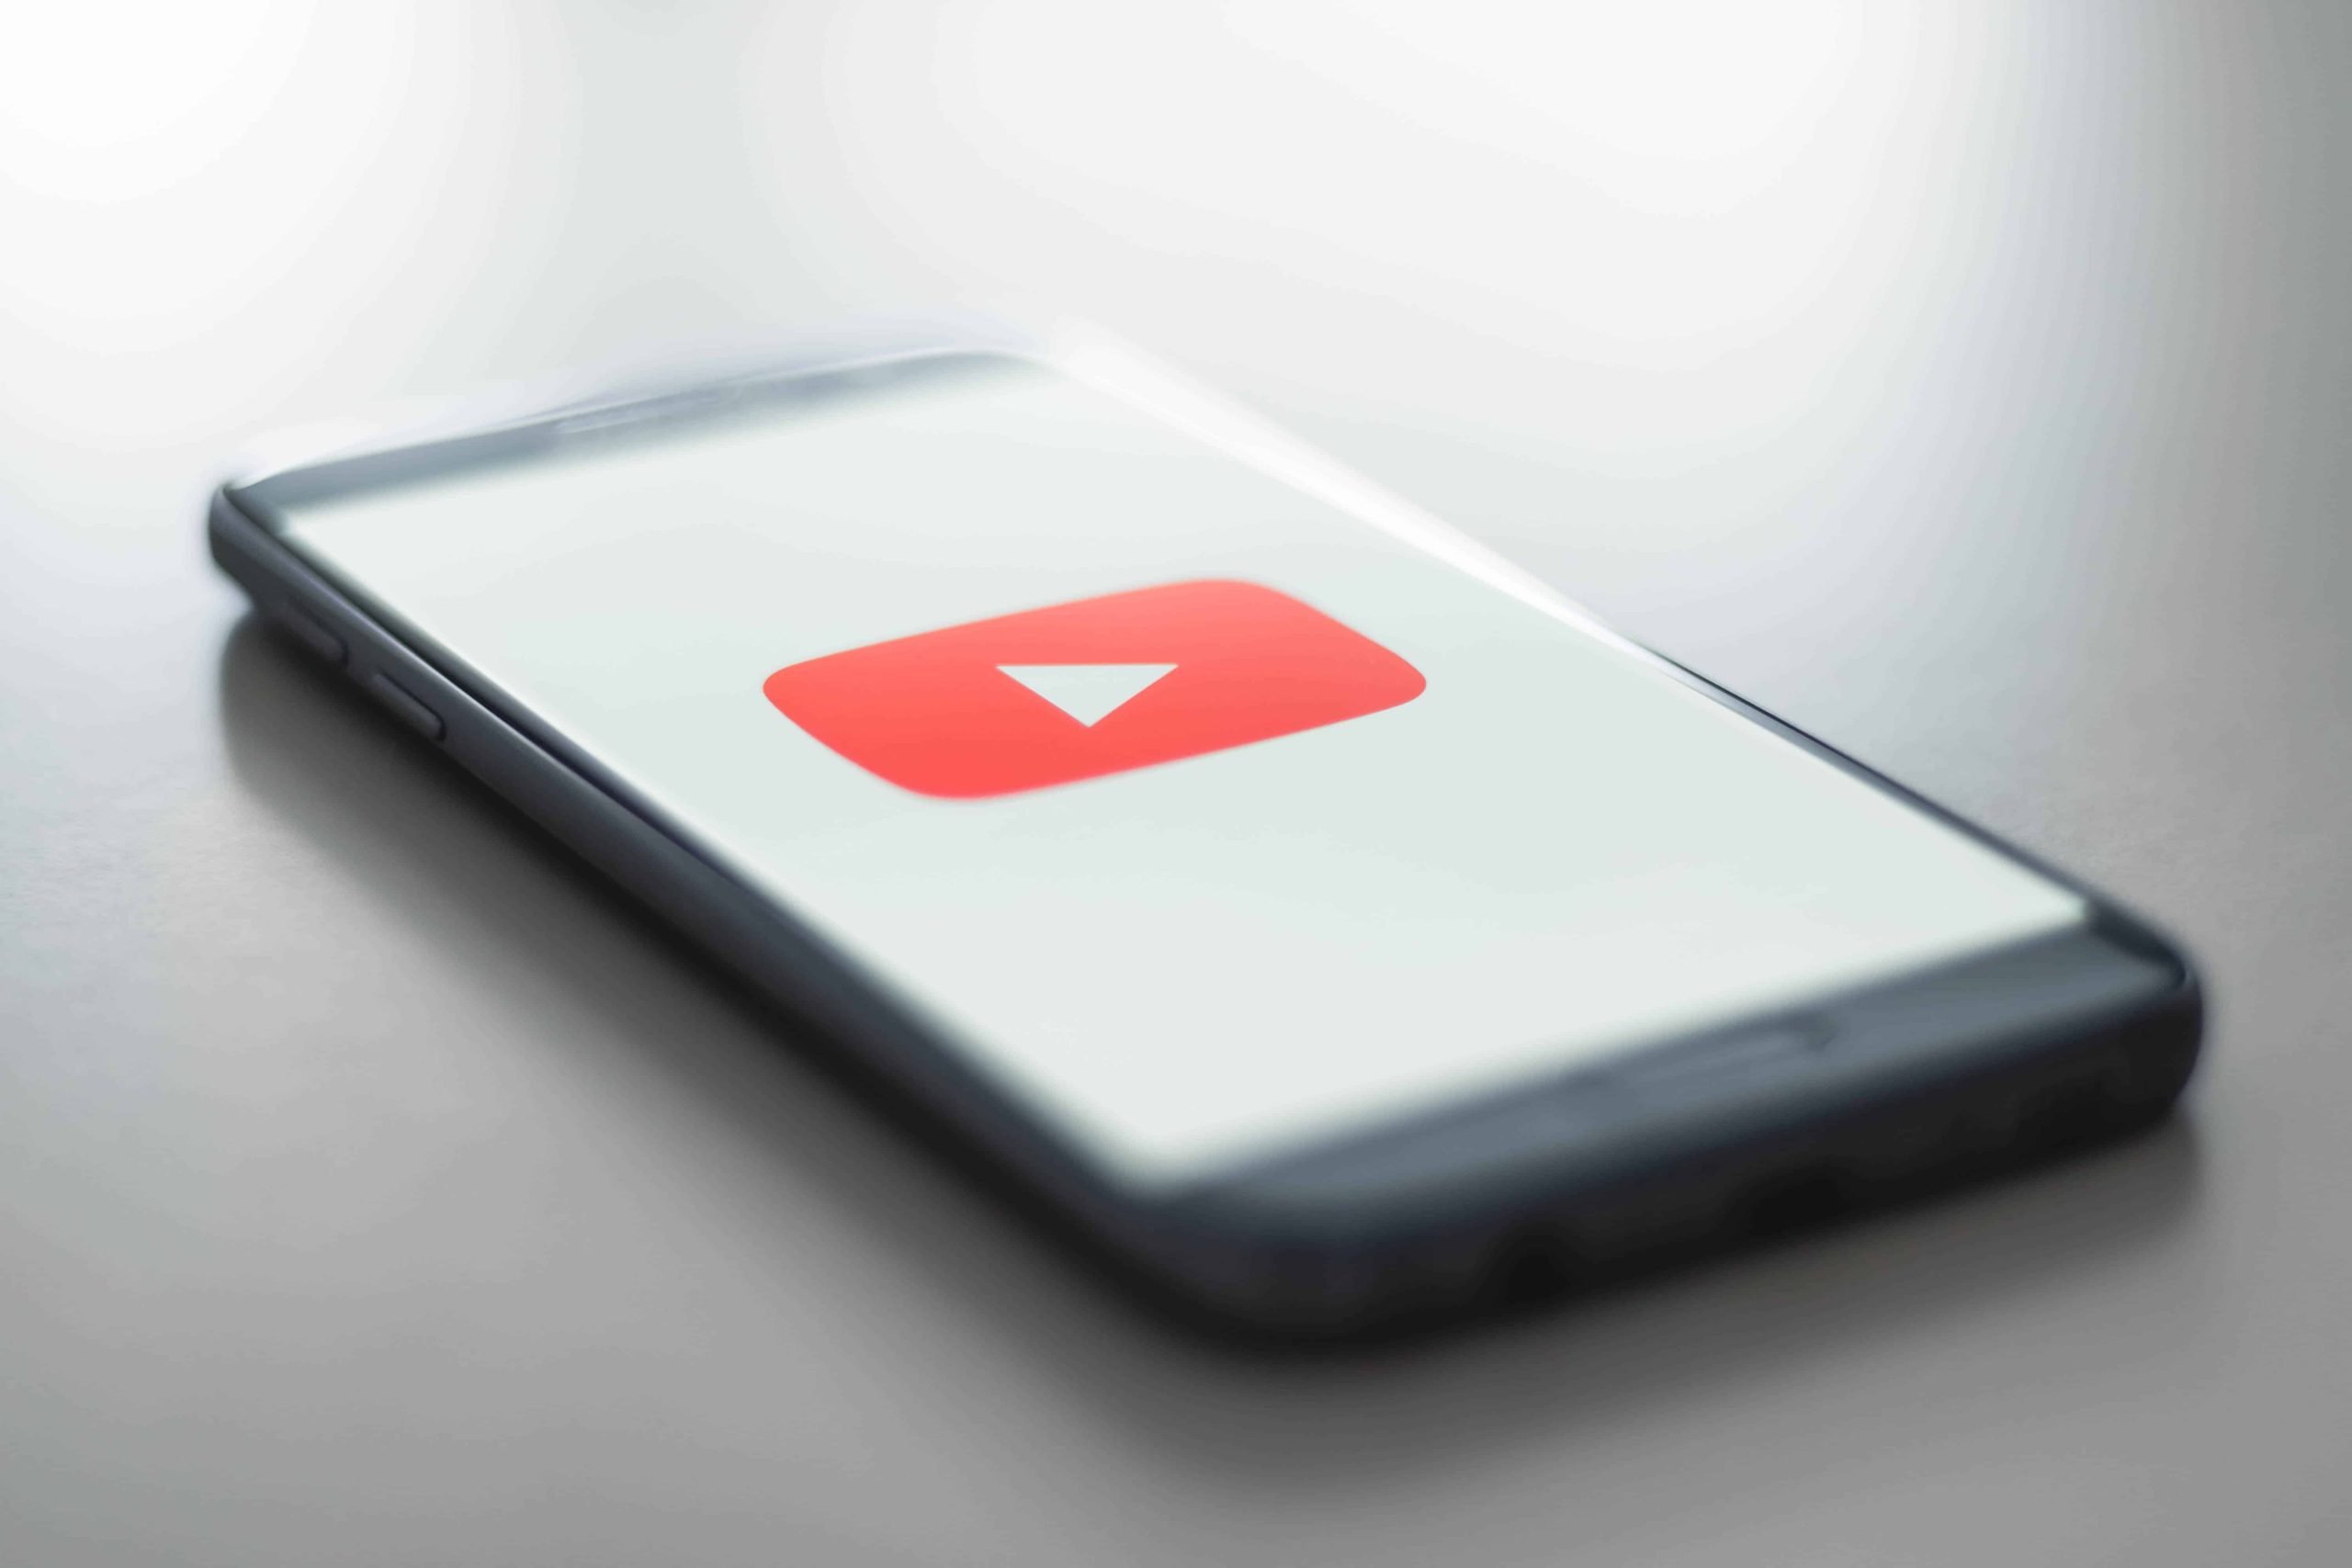 YouTube claims to have paid the music industry over $3 billion in 2019